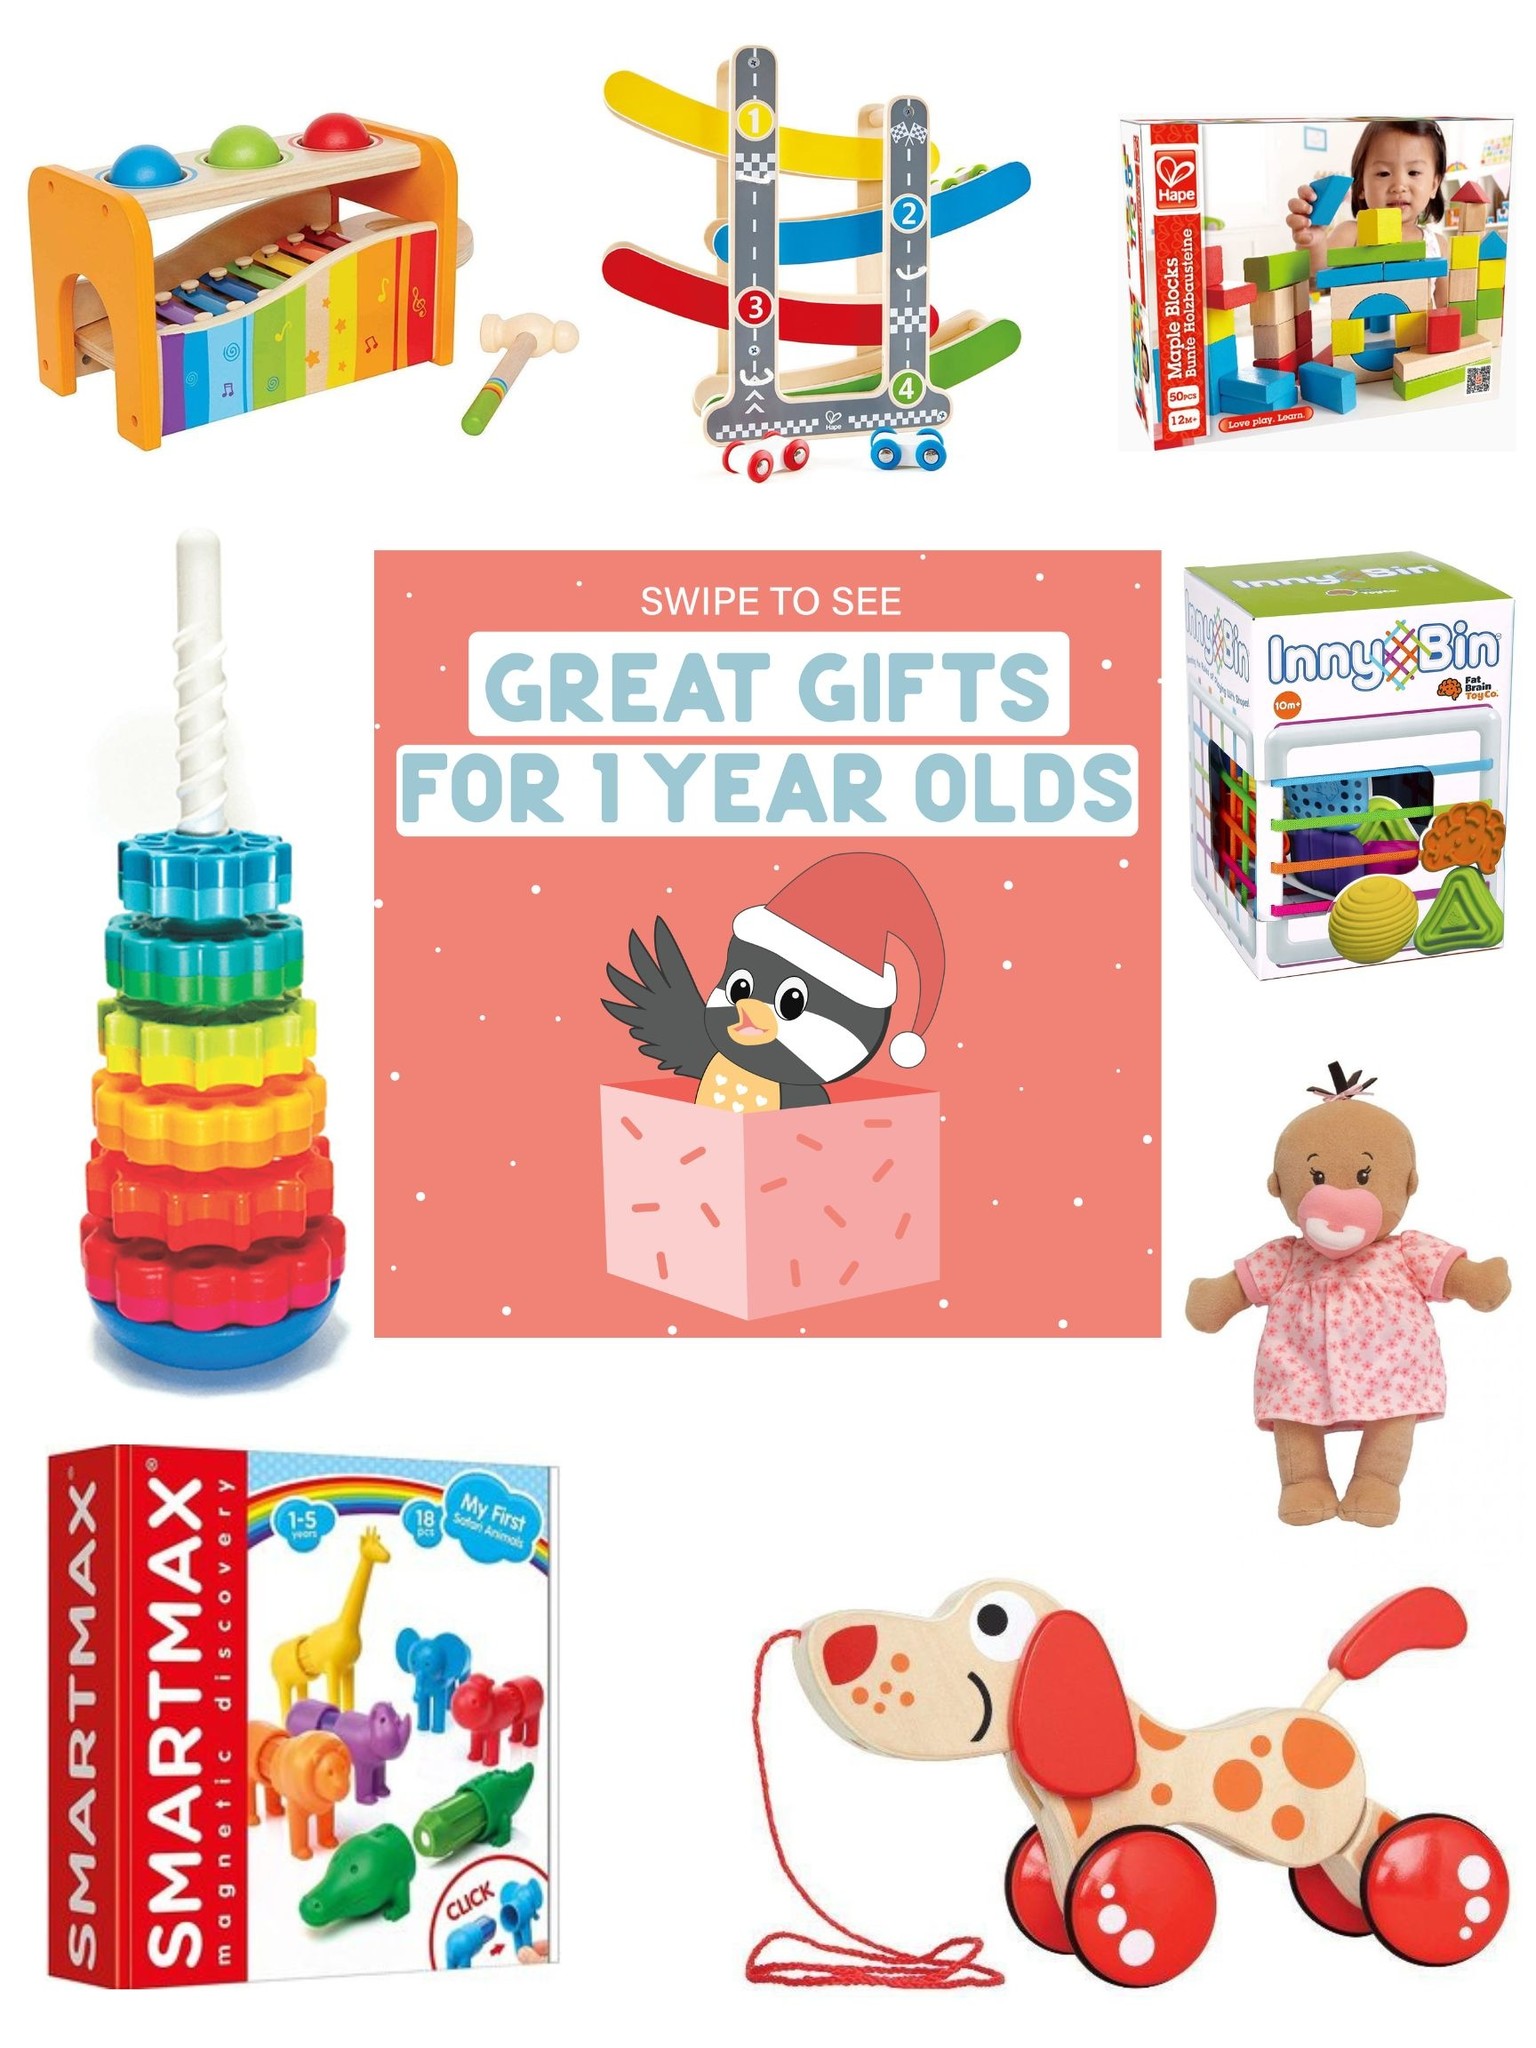 Holiday Gift Guide: Great Gifts for 1 Year Olds